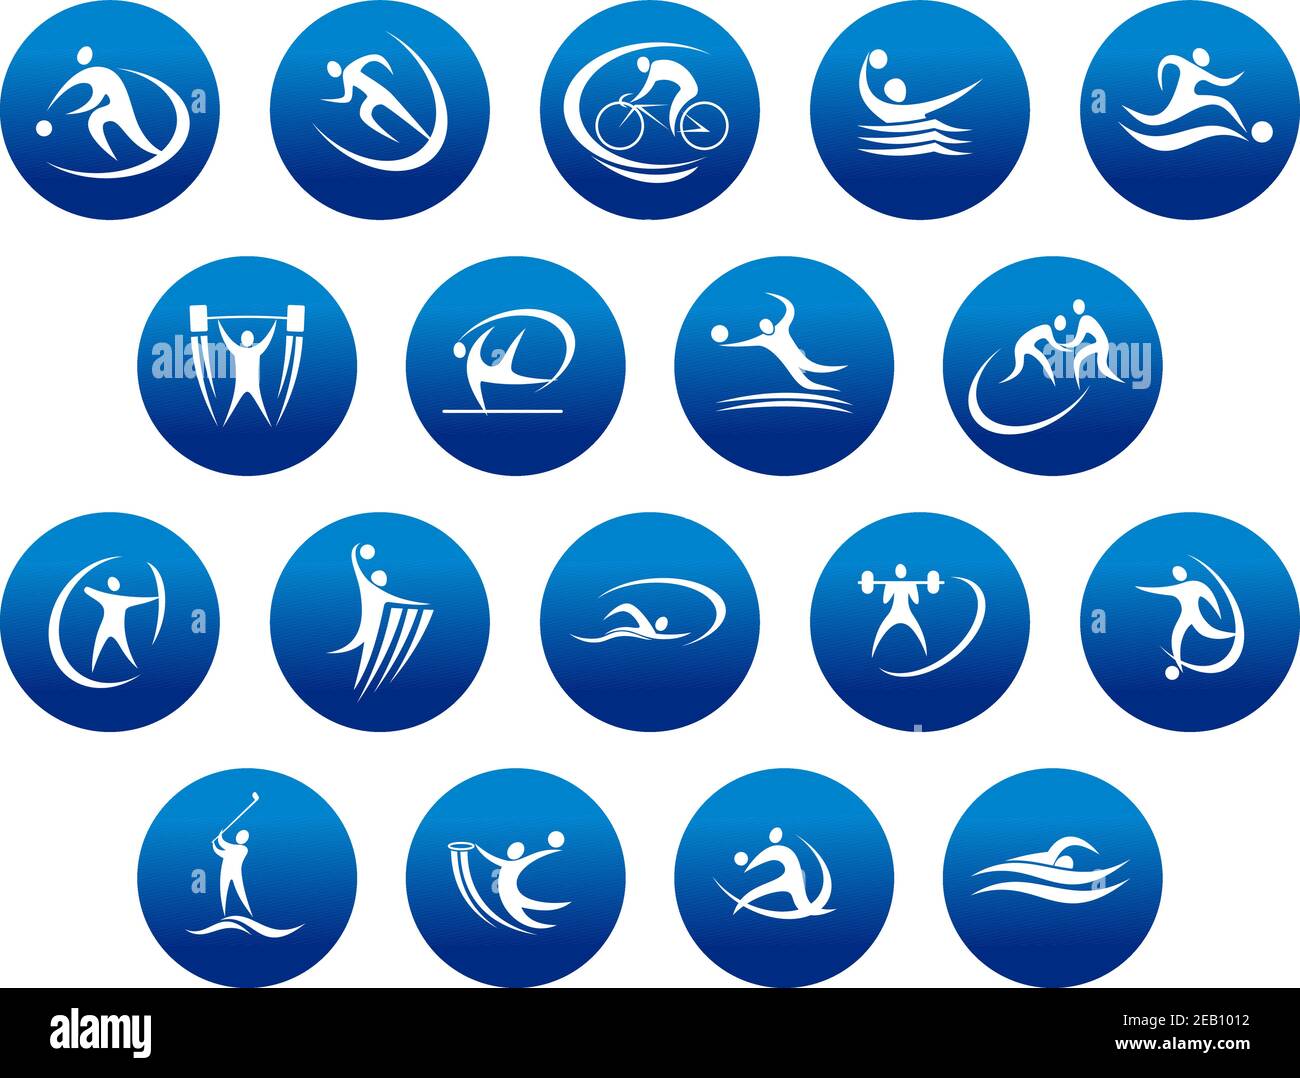 Athletics and team sport icons or symbols for sporting and fitness